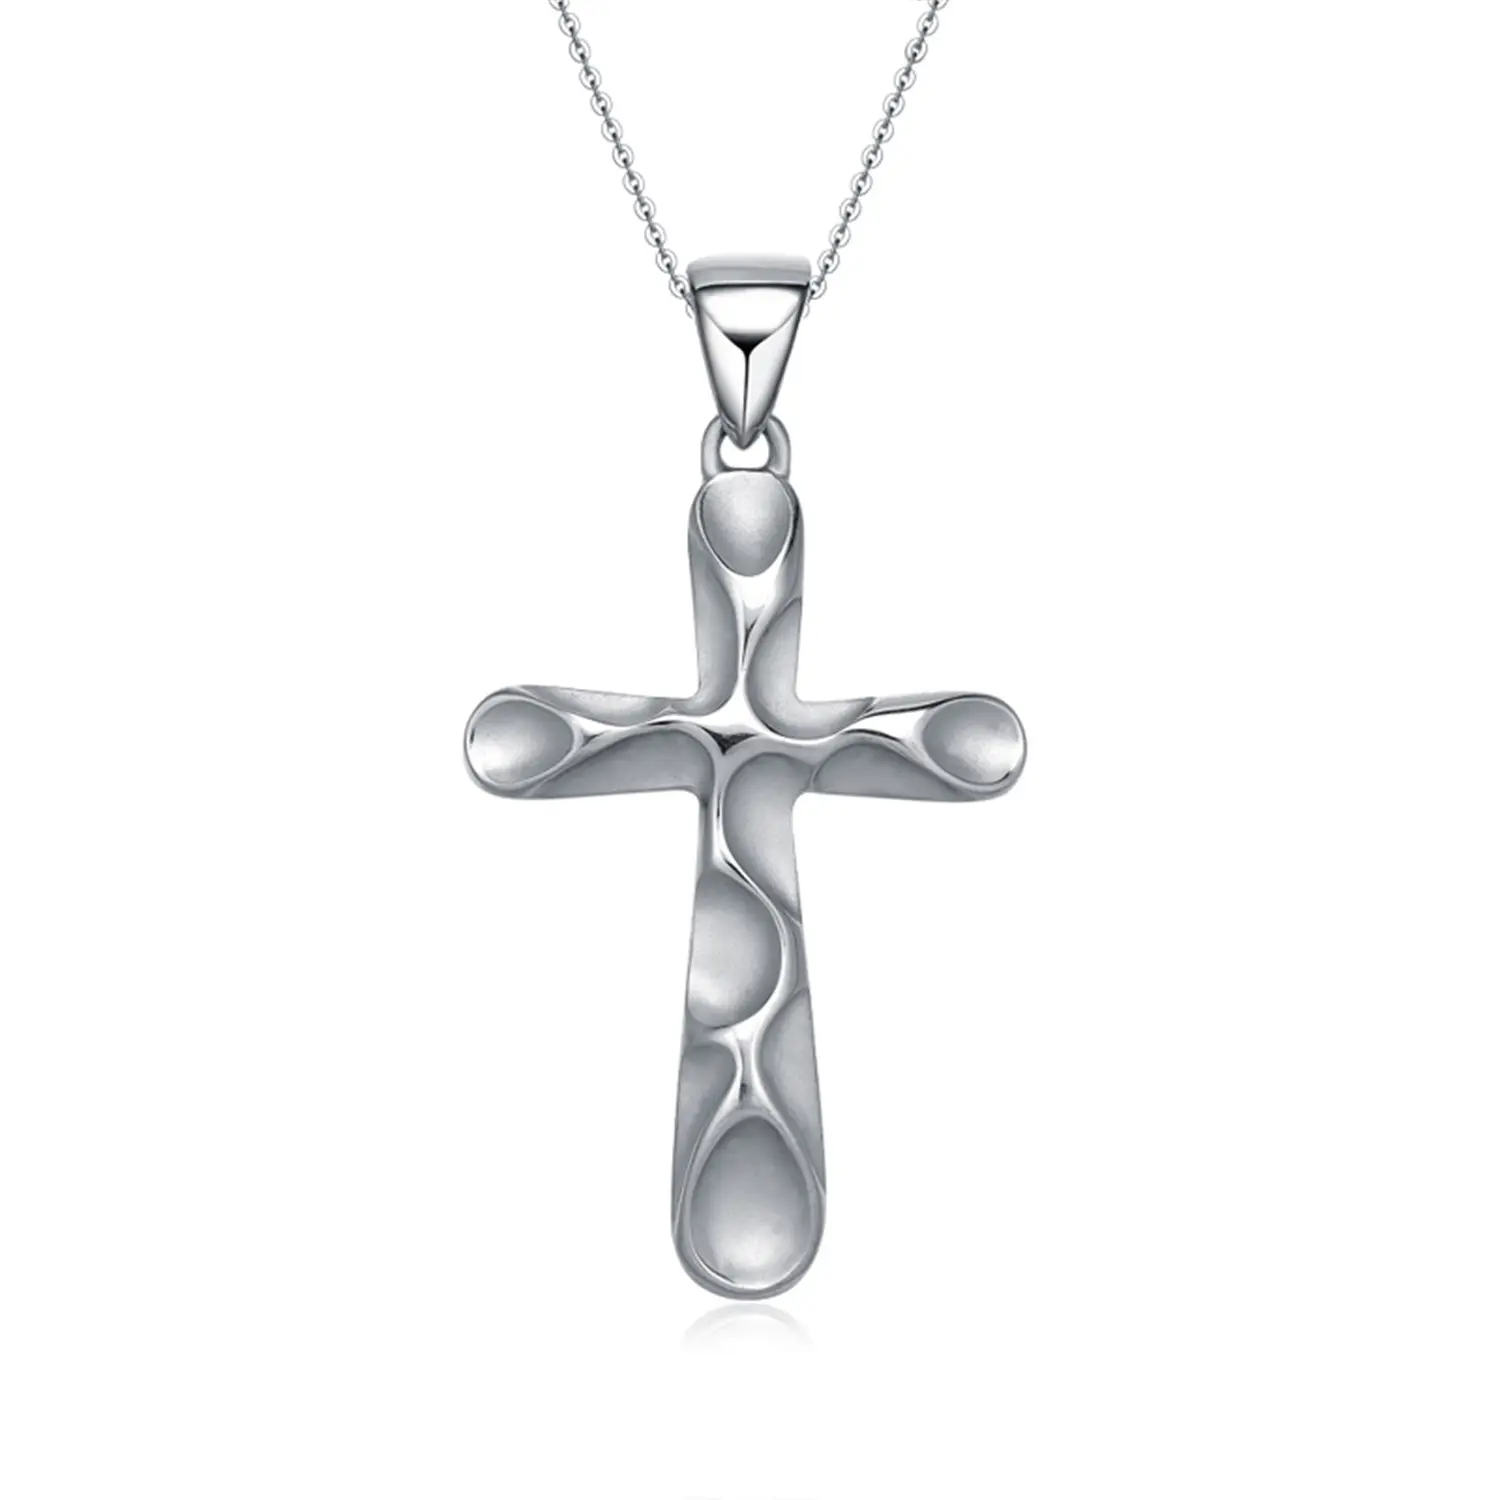 Wholesale High Quality Rhodium Plated Personalized 925 Sterling Silver Jewelry Charm Cross Pendant Necklace